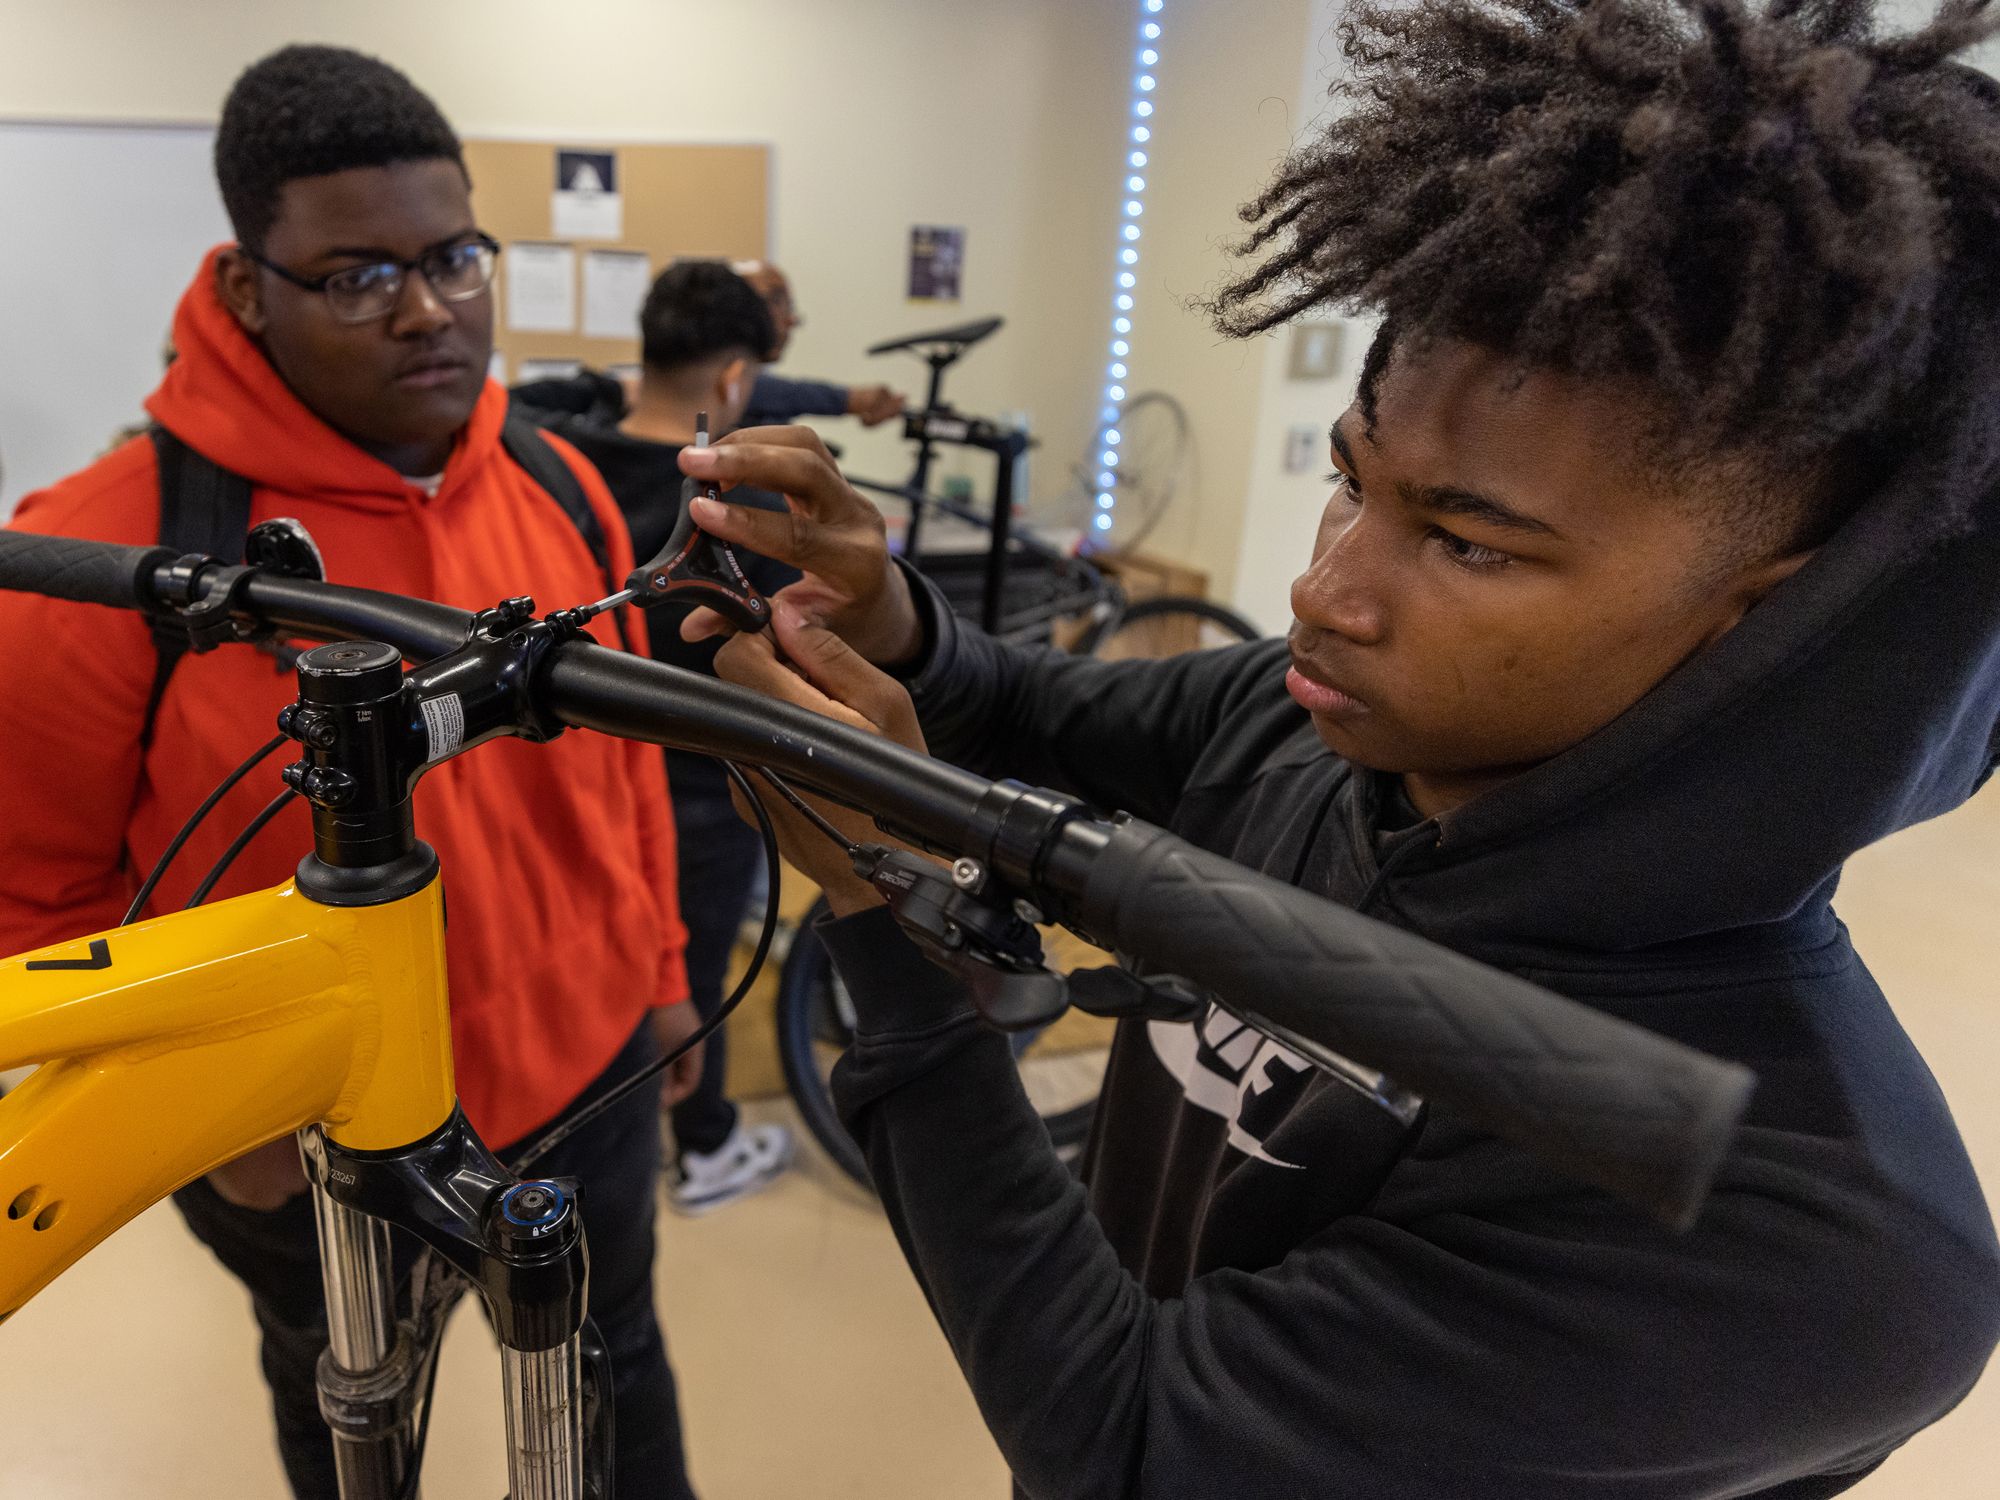 A student looks on as another works on the handlebar of a bike.